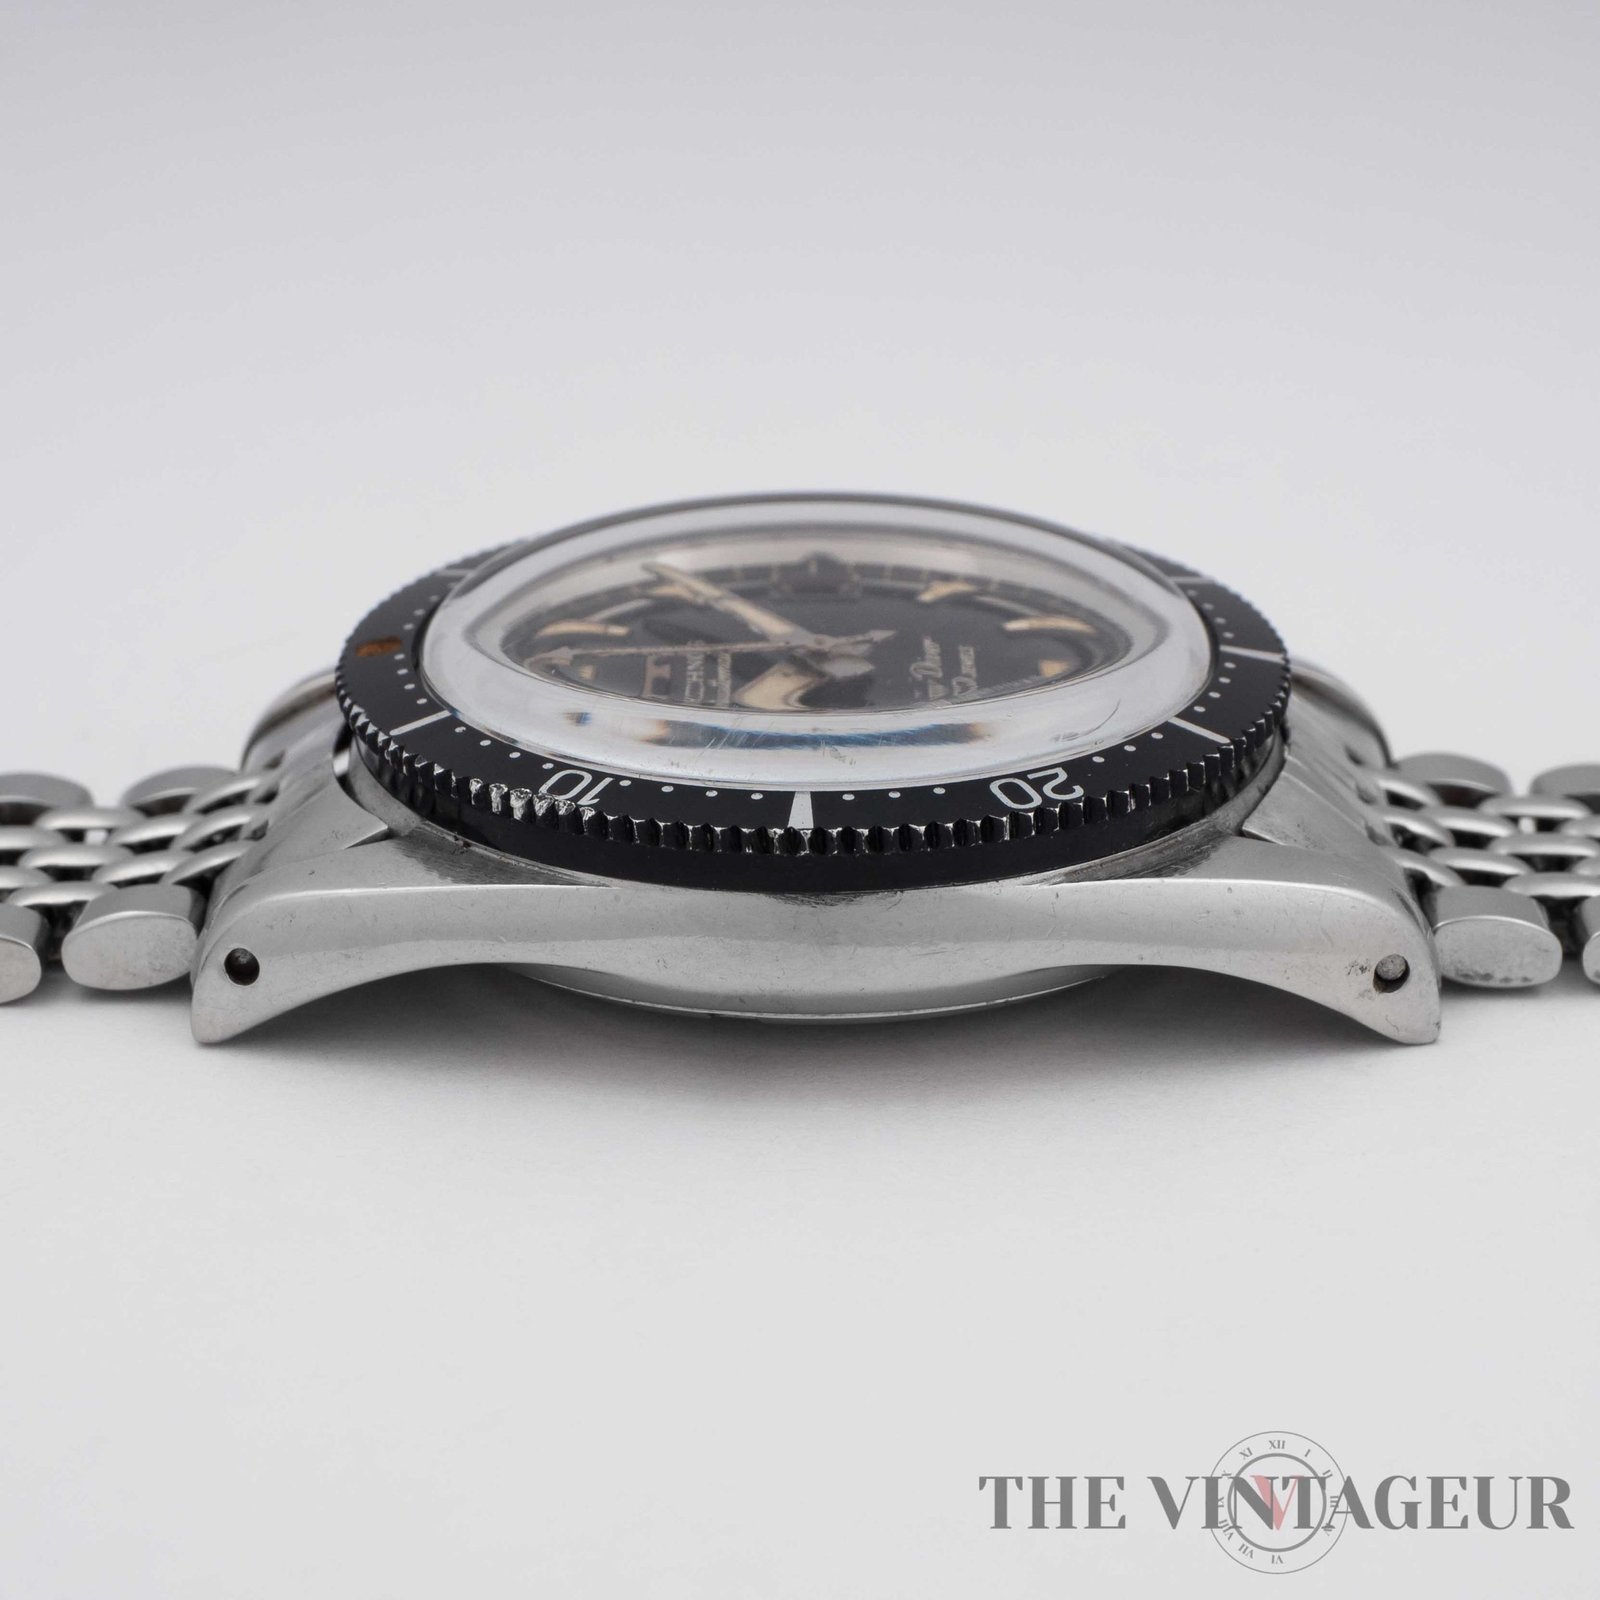 Technos – Sky Diver - The Vintageur - Your bespoke watches collection - Collectible watches and more